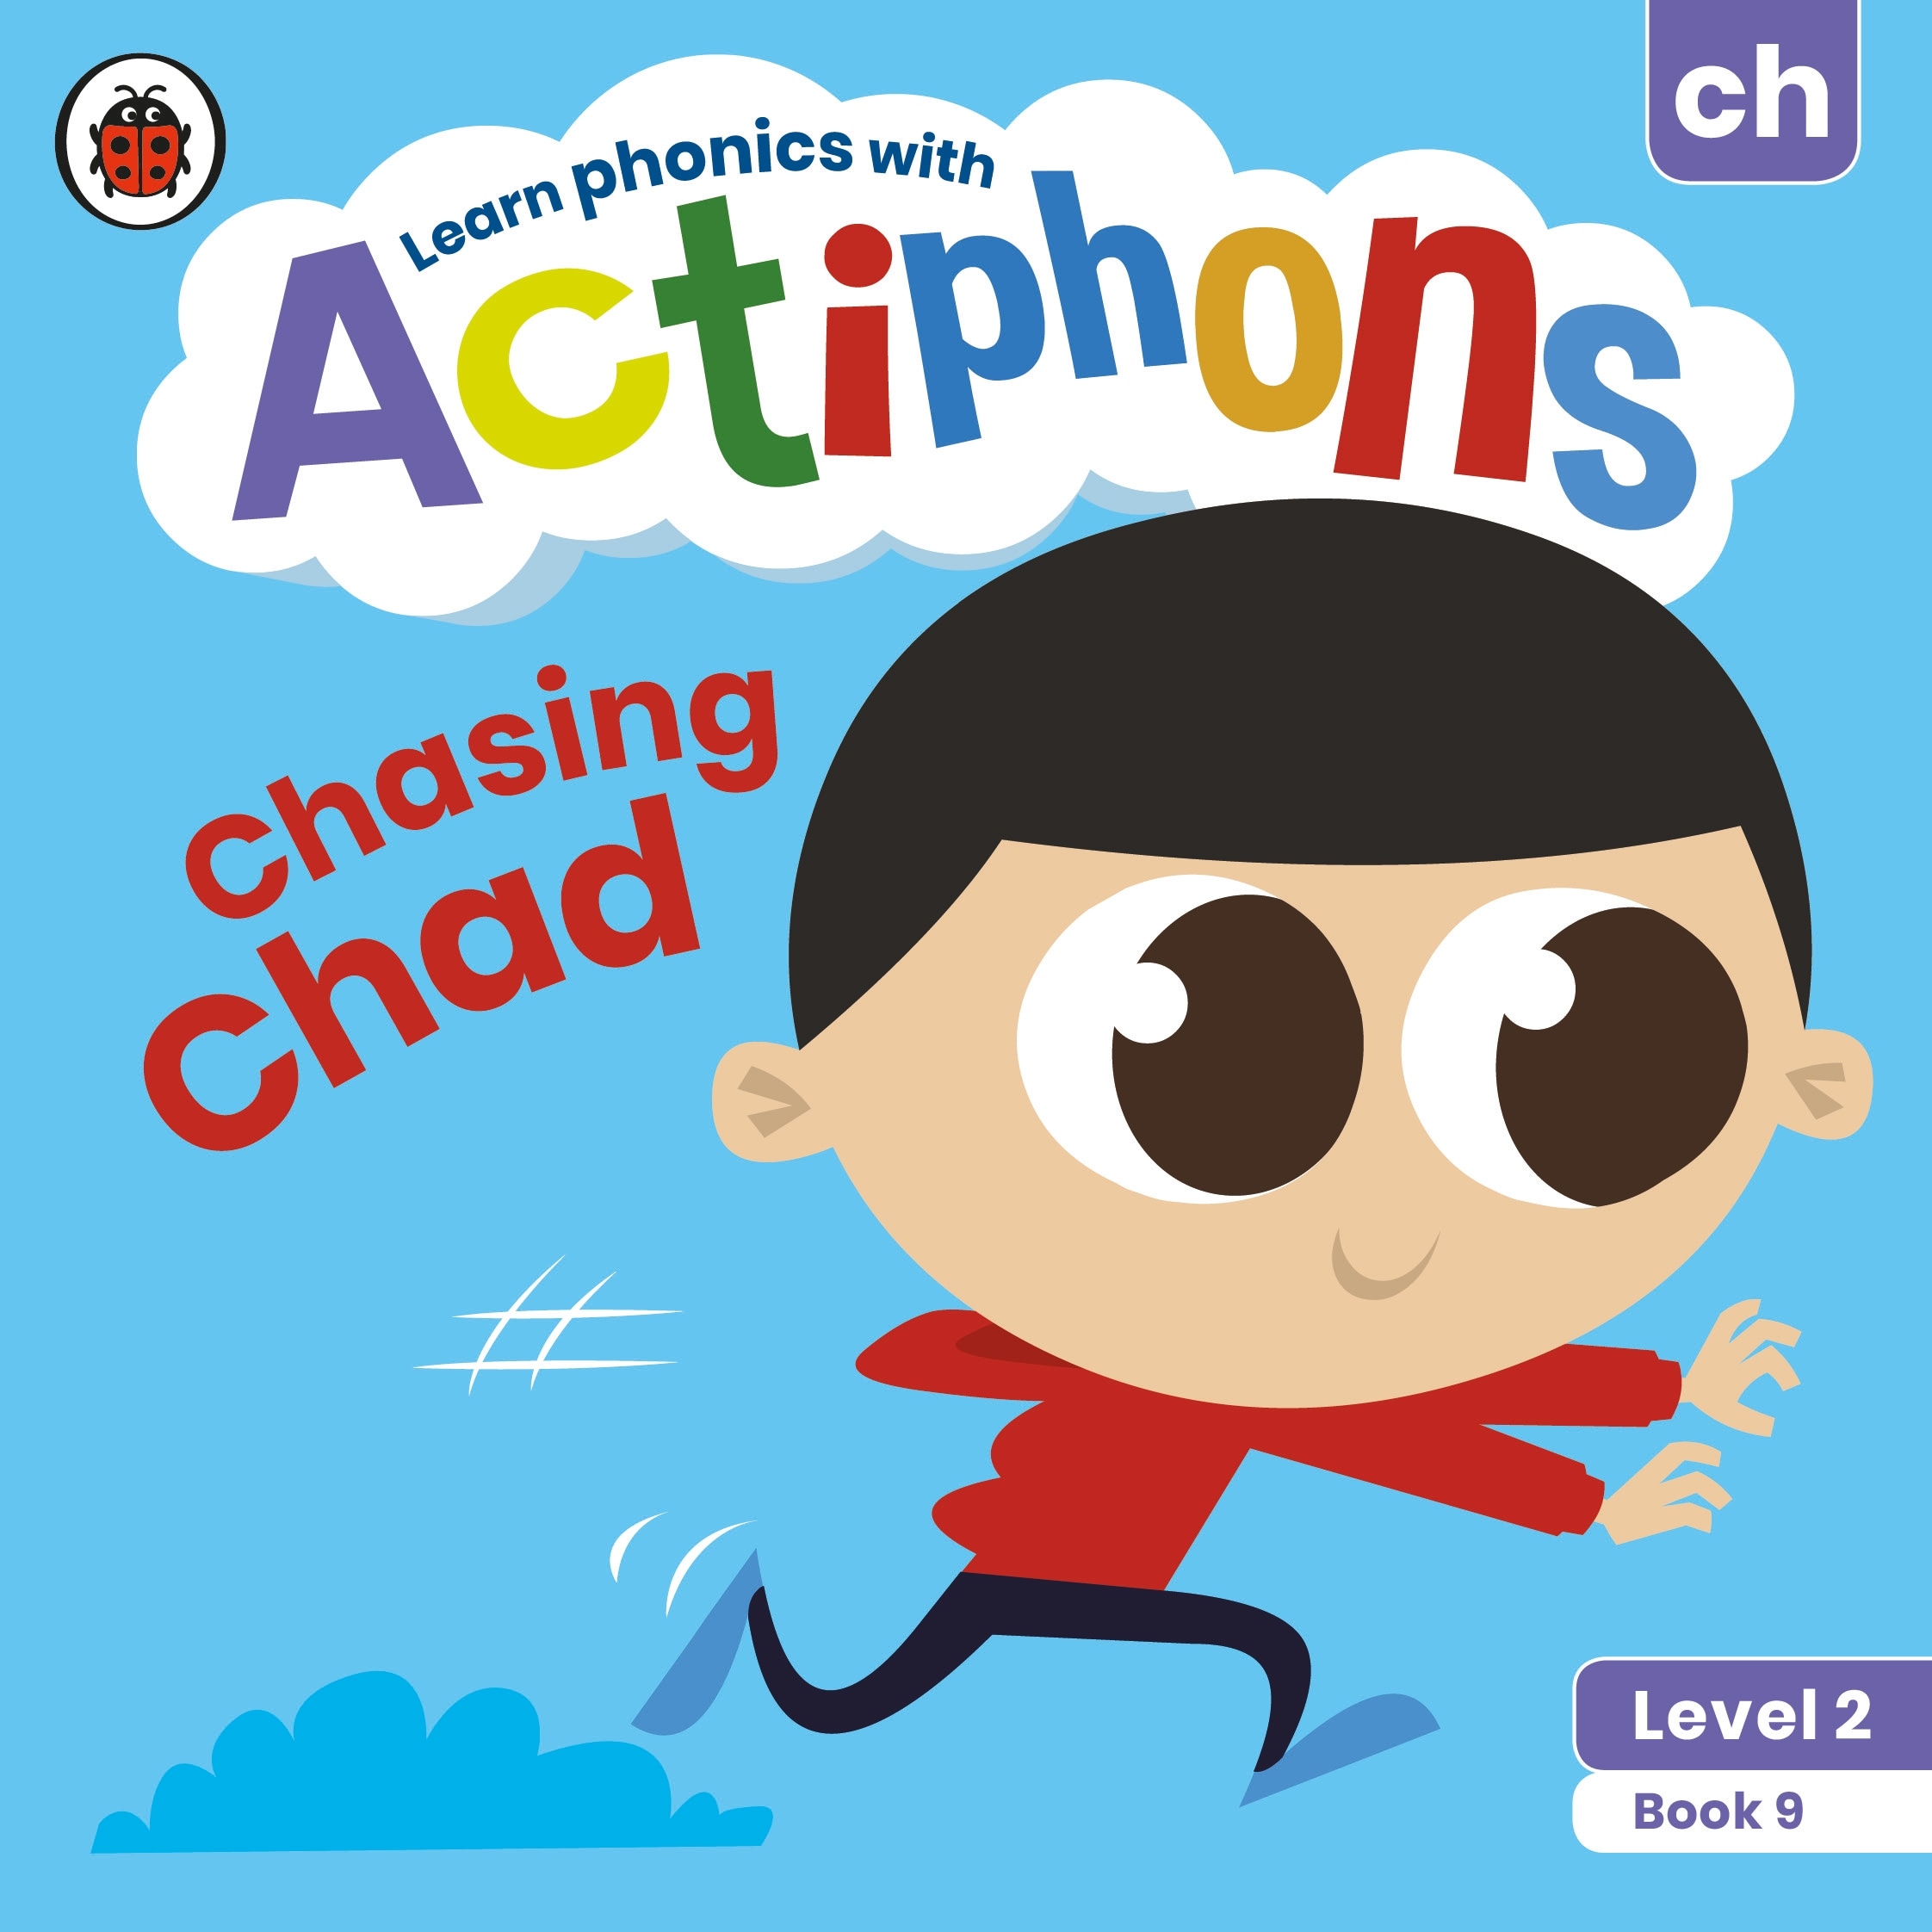 Actiphons Level 2 Book 9 Chasing Chad